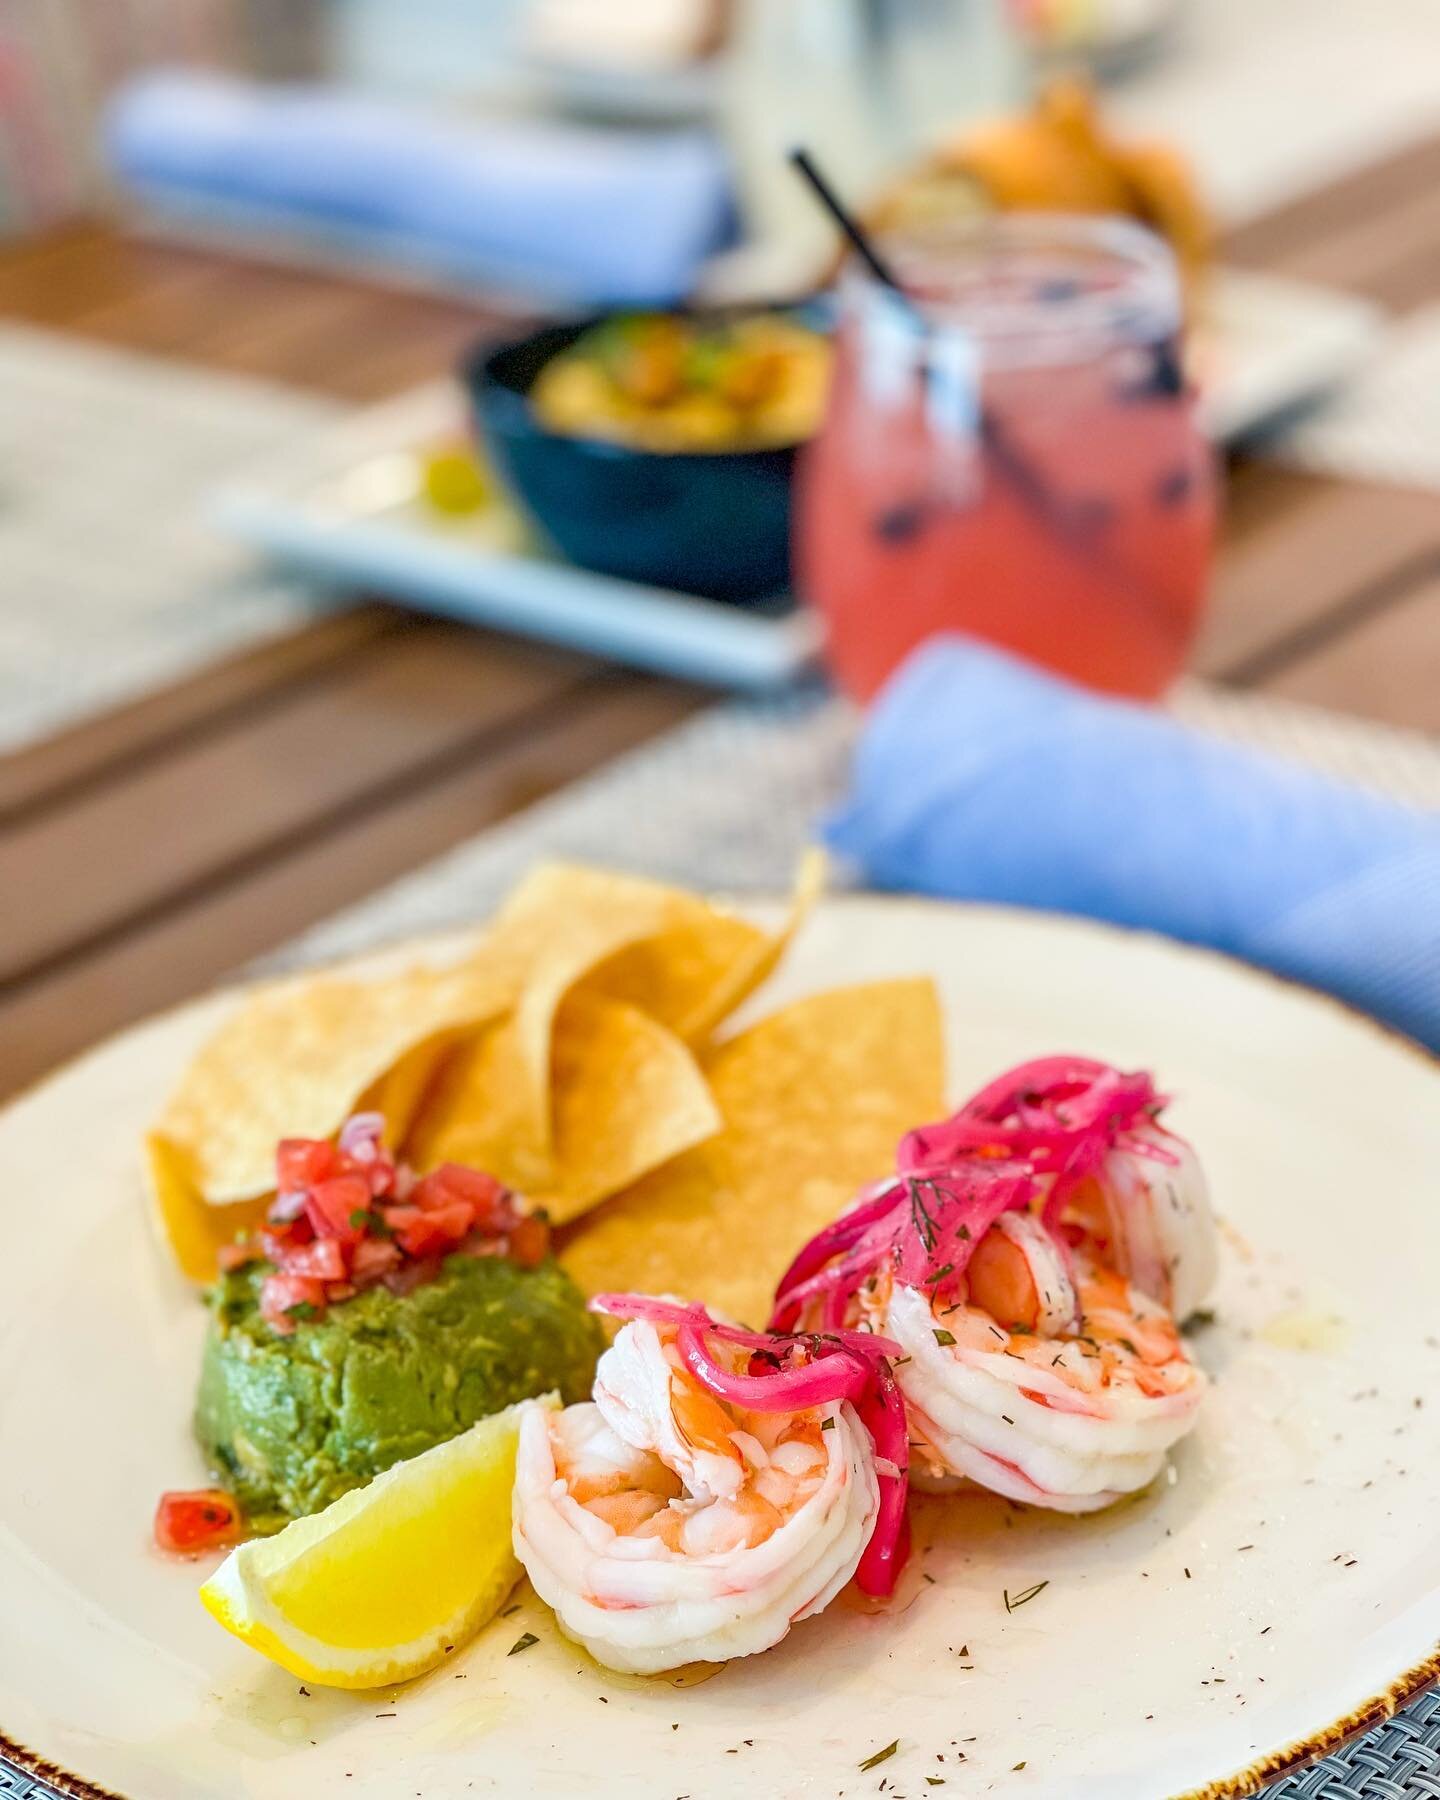 A &ldquo;can&rsquo;t miss&rdquo; dish on our lunch menu - citrus shrimp with fresh guacamole, onion-cilantro salad, and corn tortilla chips.